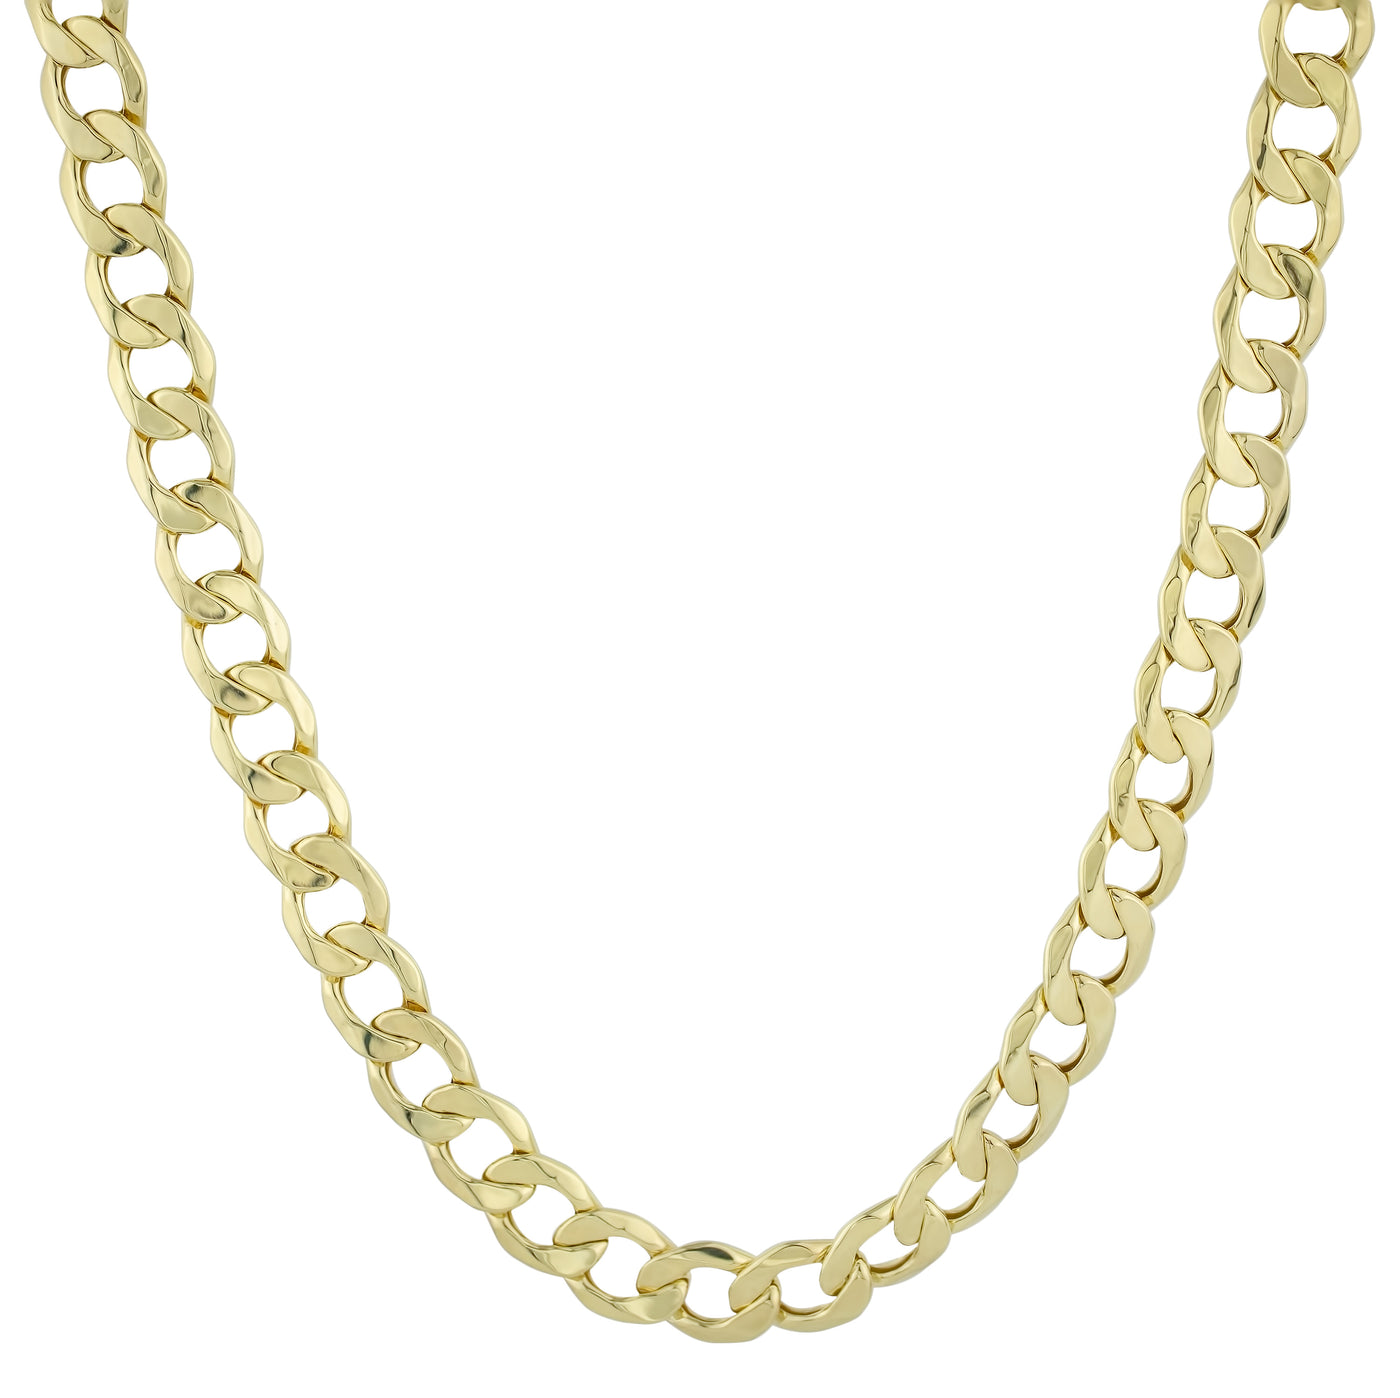 Miami Curb Link Chain Necklace 10K Yellow Gold - Hollow